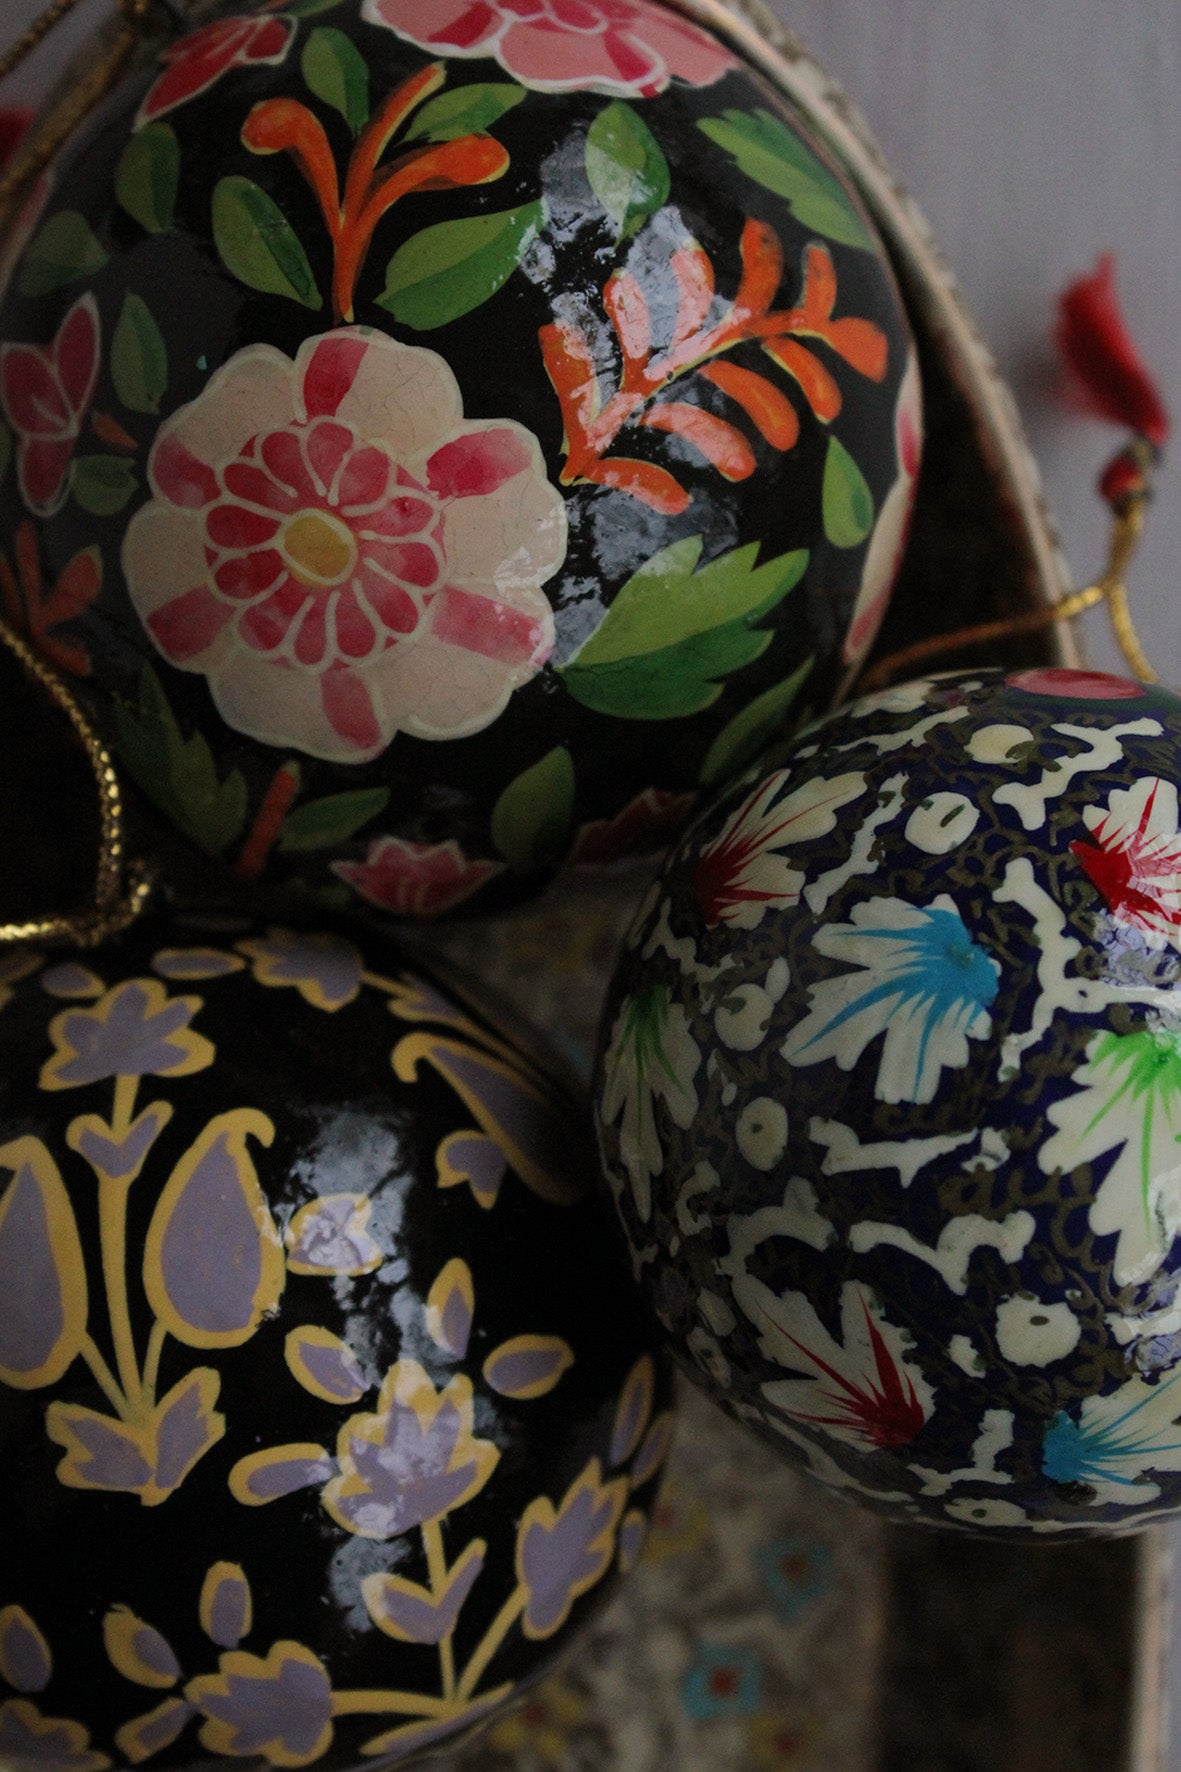 Hand Painted Floral Ornaments - Dark Floral (1)